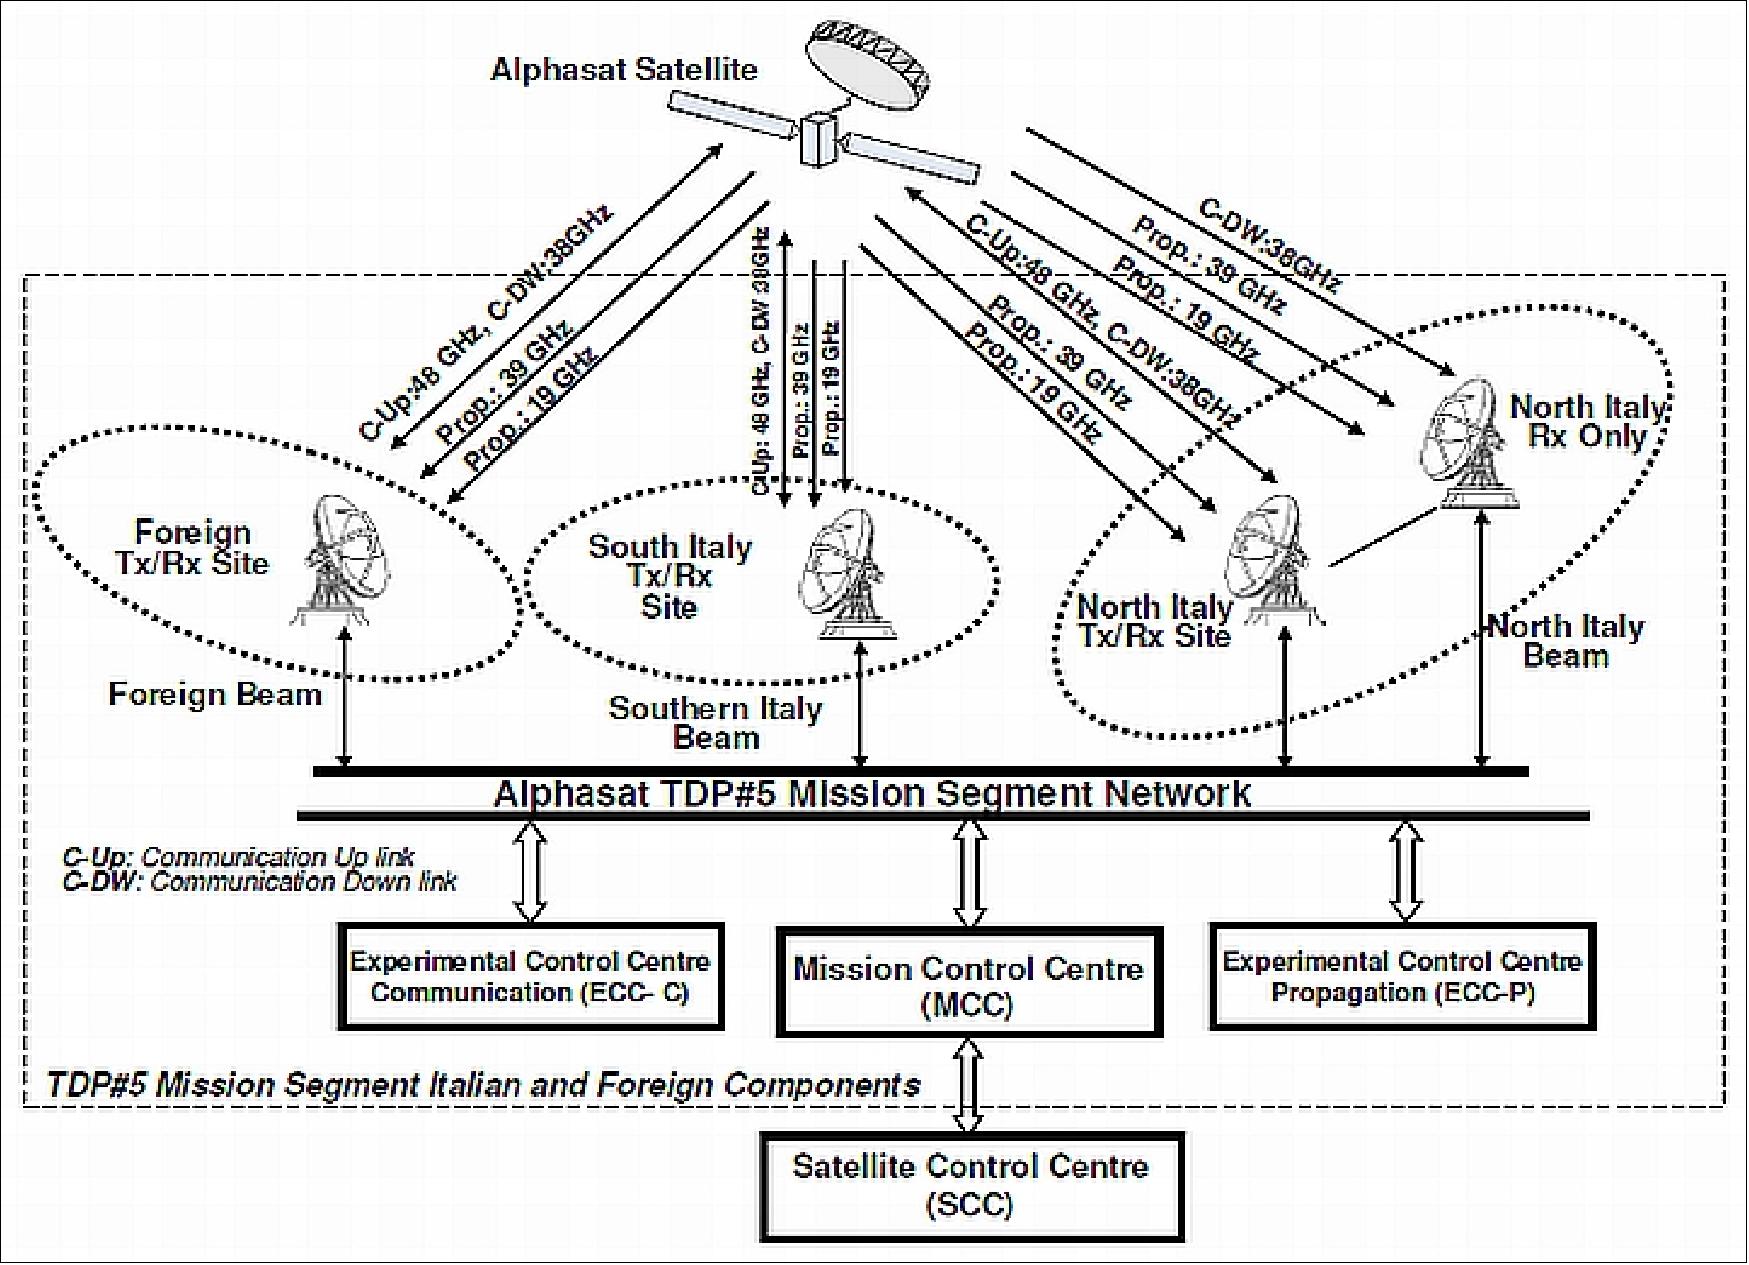 Figure 41: Alternate view of the TDP5 ground system (image credit: Space Engineering S.p.A., ASI) 69)